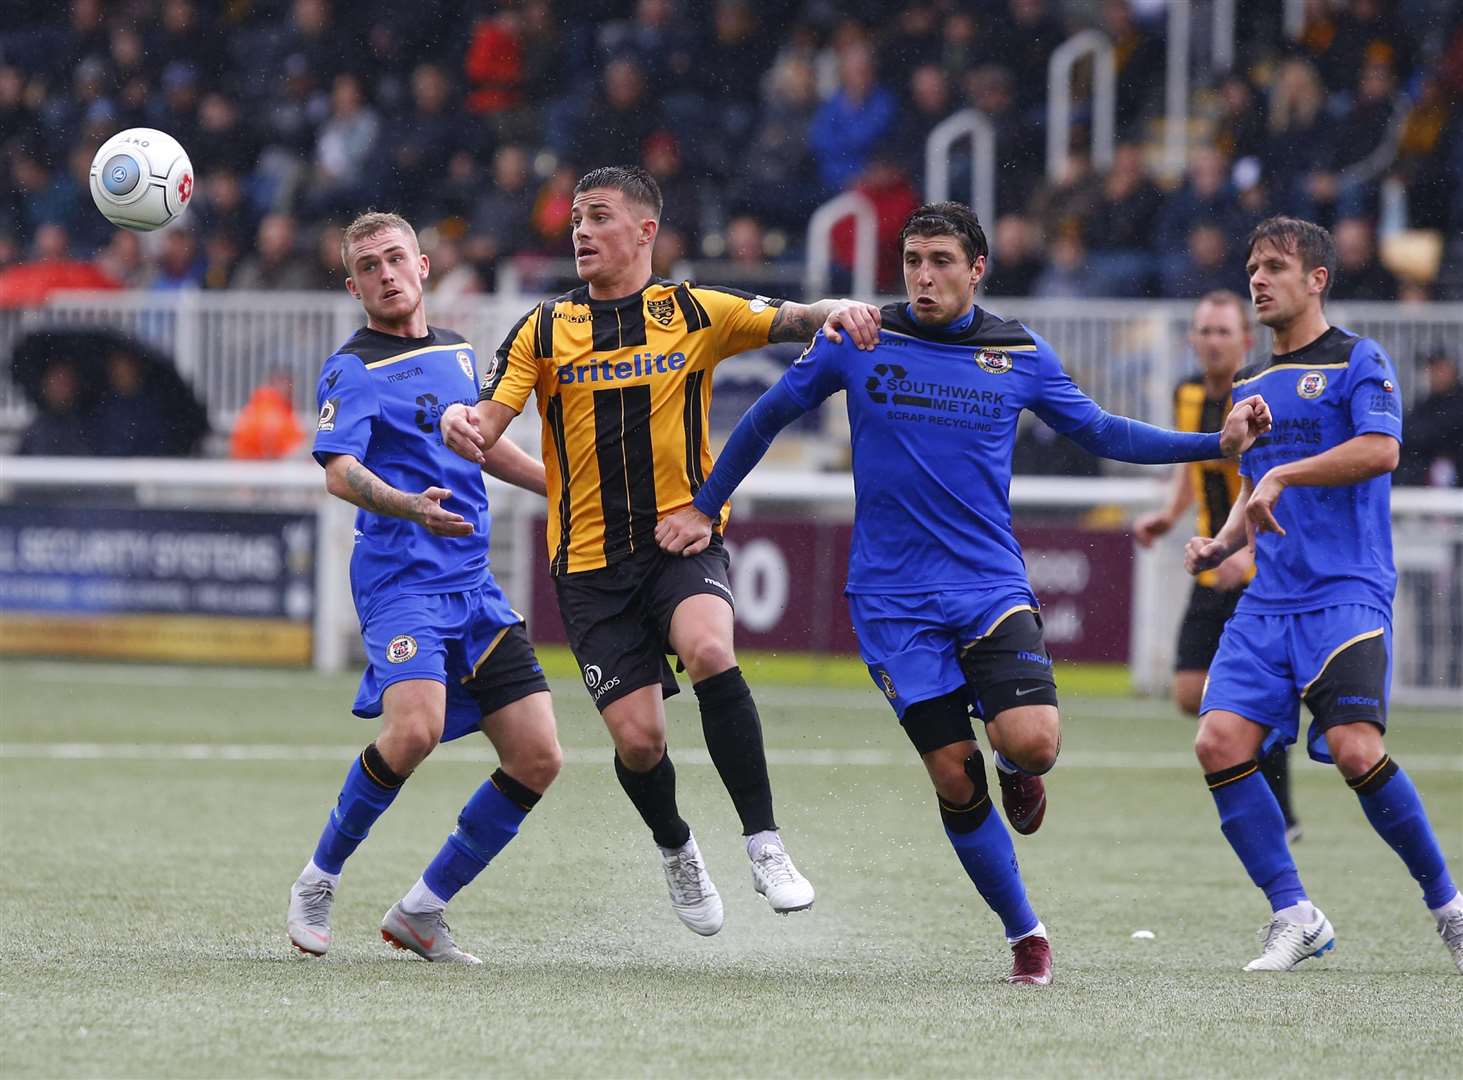 Maidstone midfielder Jack Paxman has three Bromley players for company Picture: Andy Jones